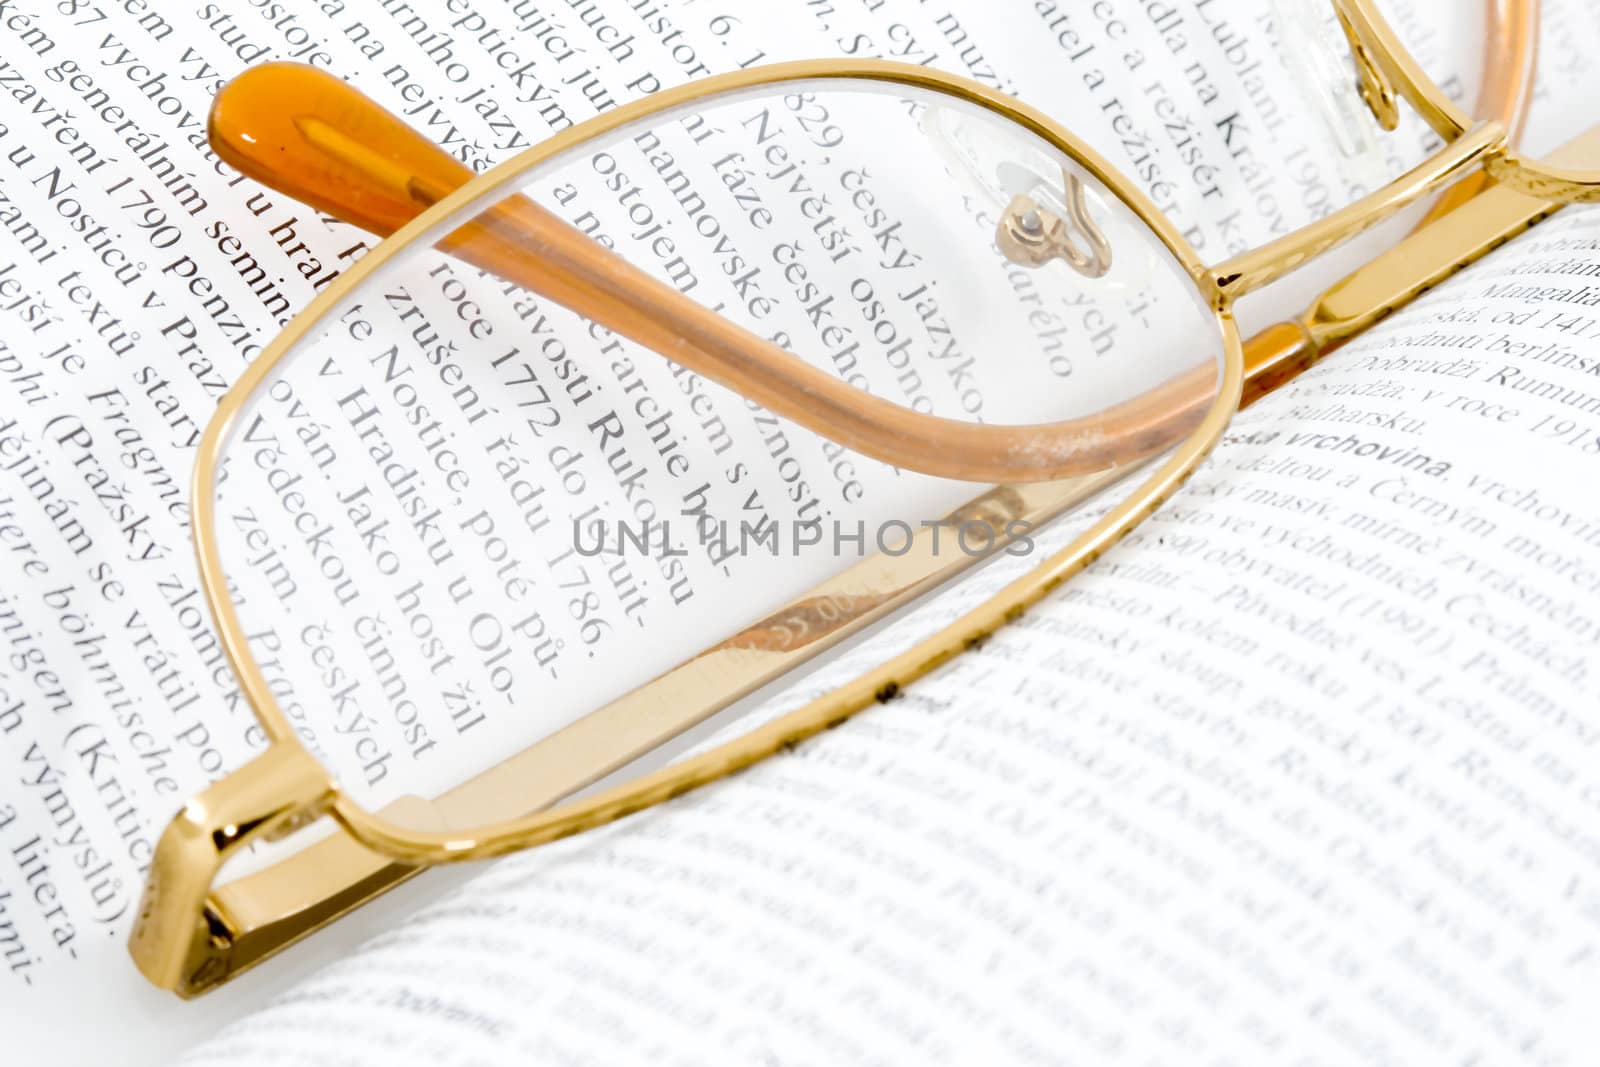 Glasses on Books by werg